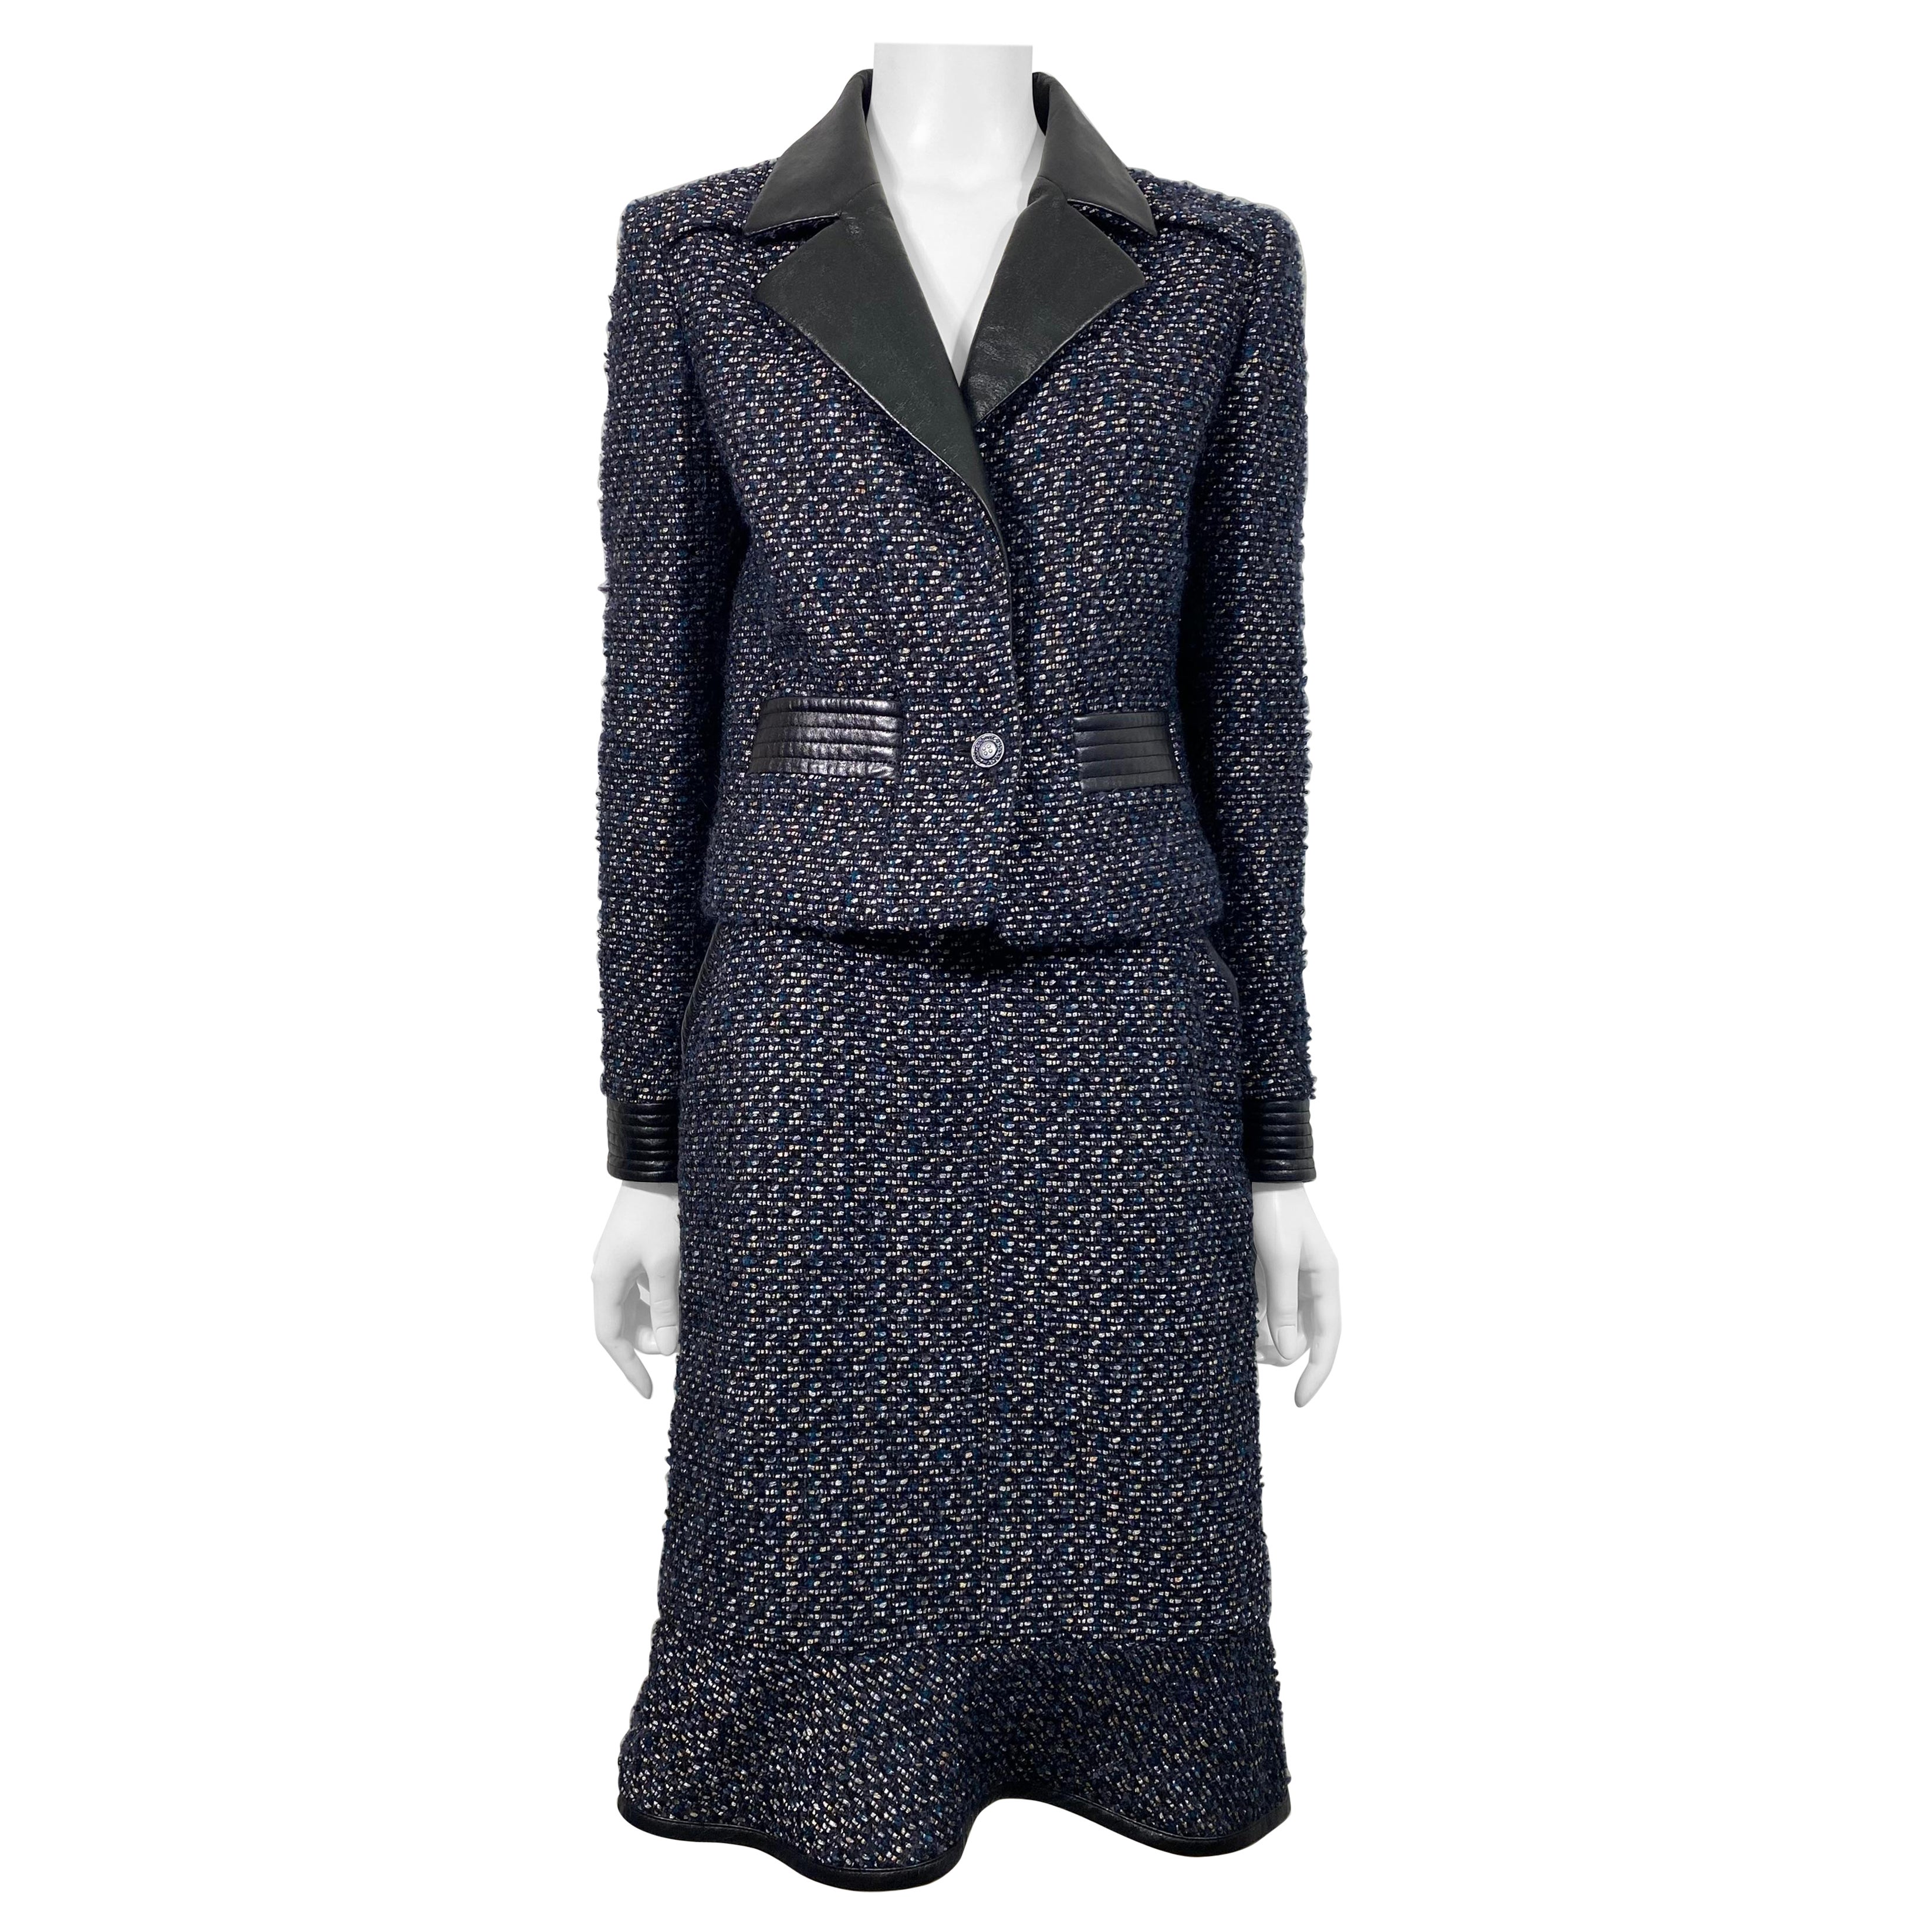 Chanel Runway Fall 2002 Navy Tweed and Black Leather Skirt Suit - Size 40  For Sale